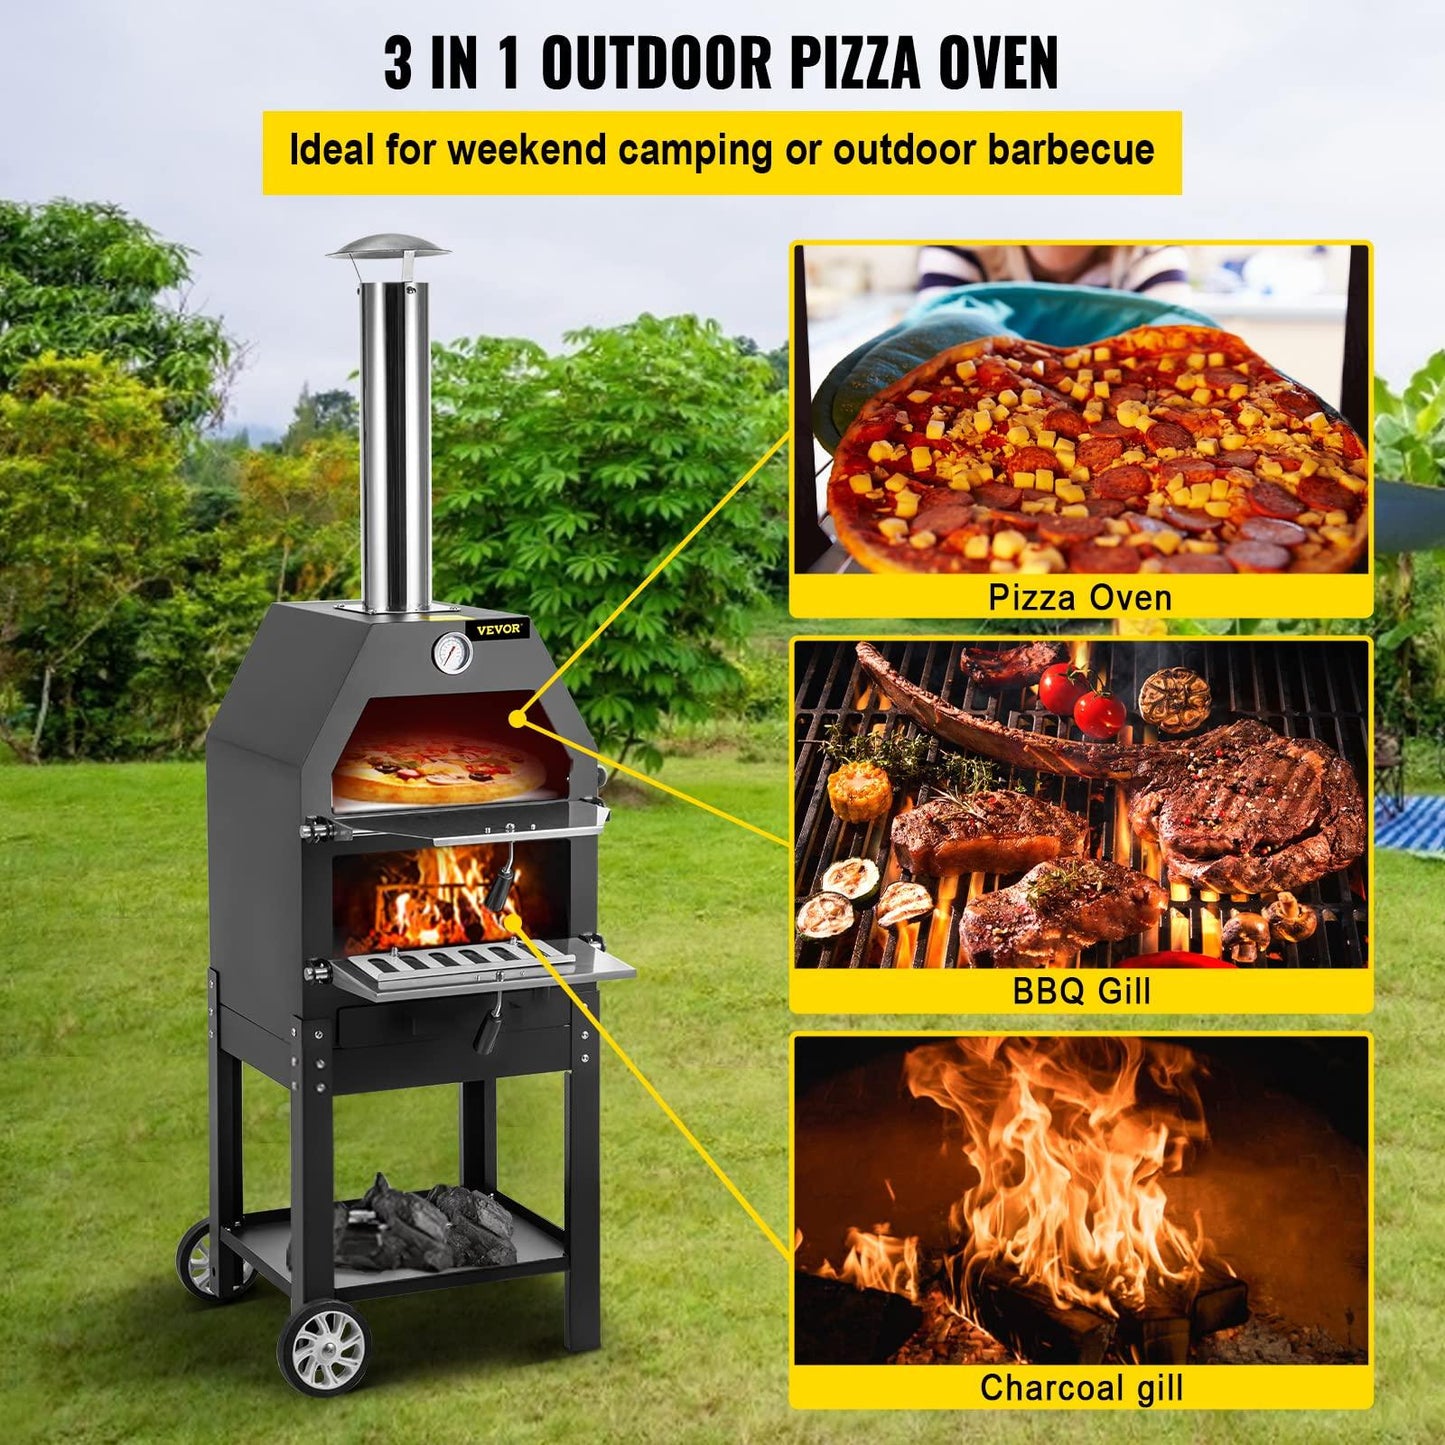 VEVOR Outdoor Pizza Oven, 12" Wood Fire Oven, 2-Layer Pizza Oven Wood Fired, Wood Burning Outdoor Pizza Oven with 2 Removable Wheels, 700℉ Max Temperature Wood Fired Pizza Maker Ovens for Barbecue - CookCave